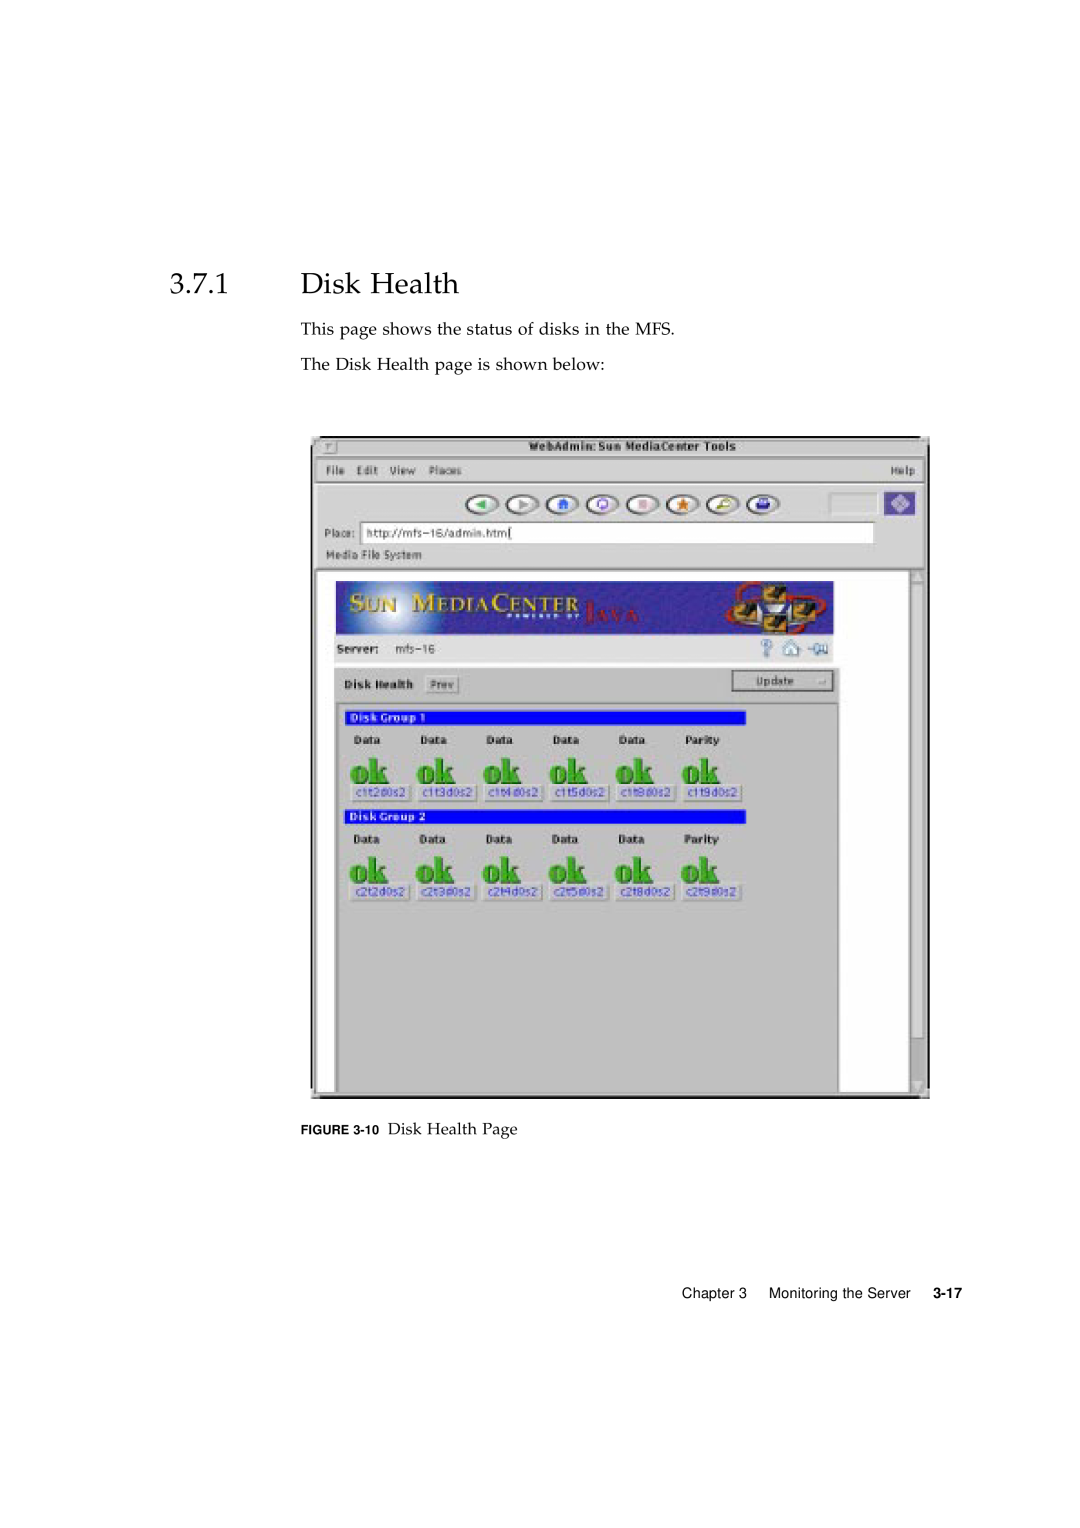 Sun Microsystems 2.1 manual This page shows the status of disks in the MFS, The Disk Health page is shown below 